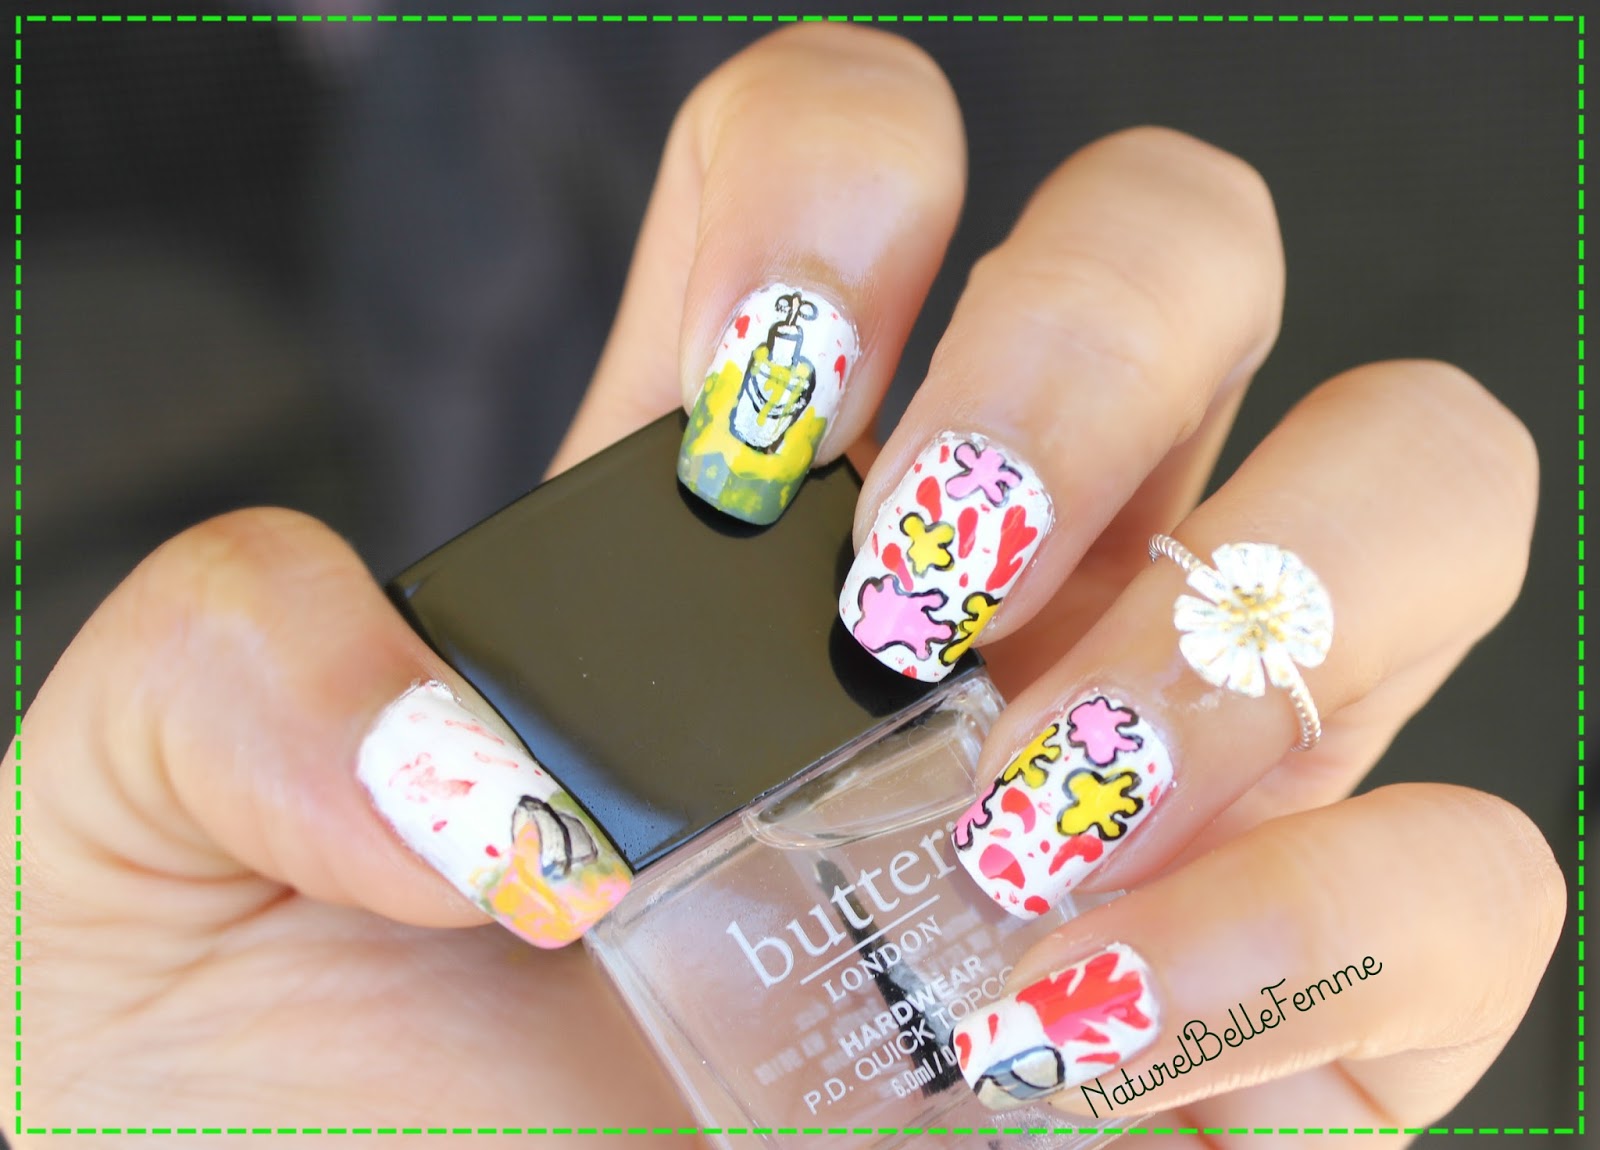 7. Holographic Festival Nails - wide 1